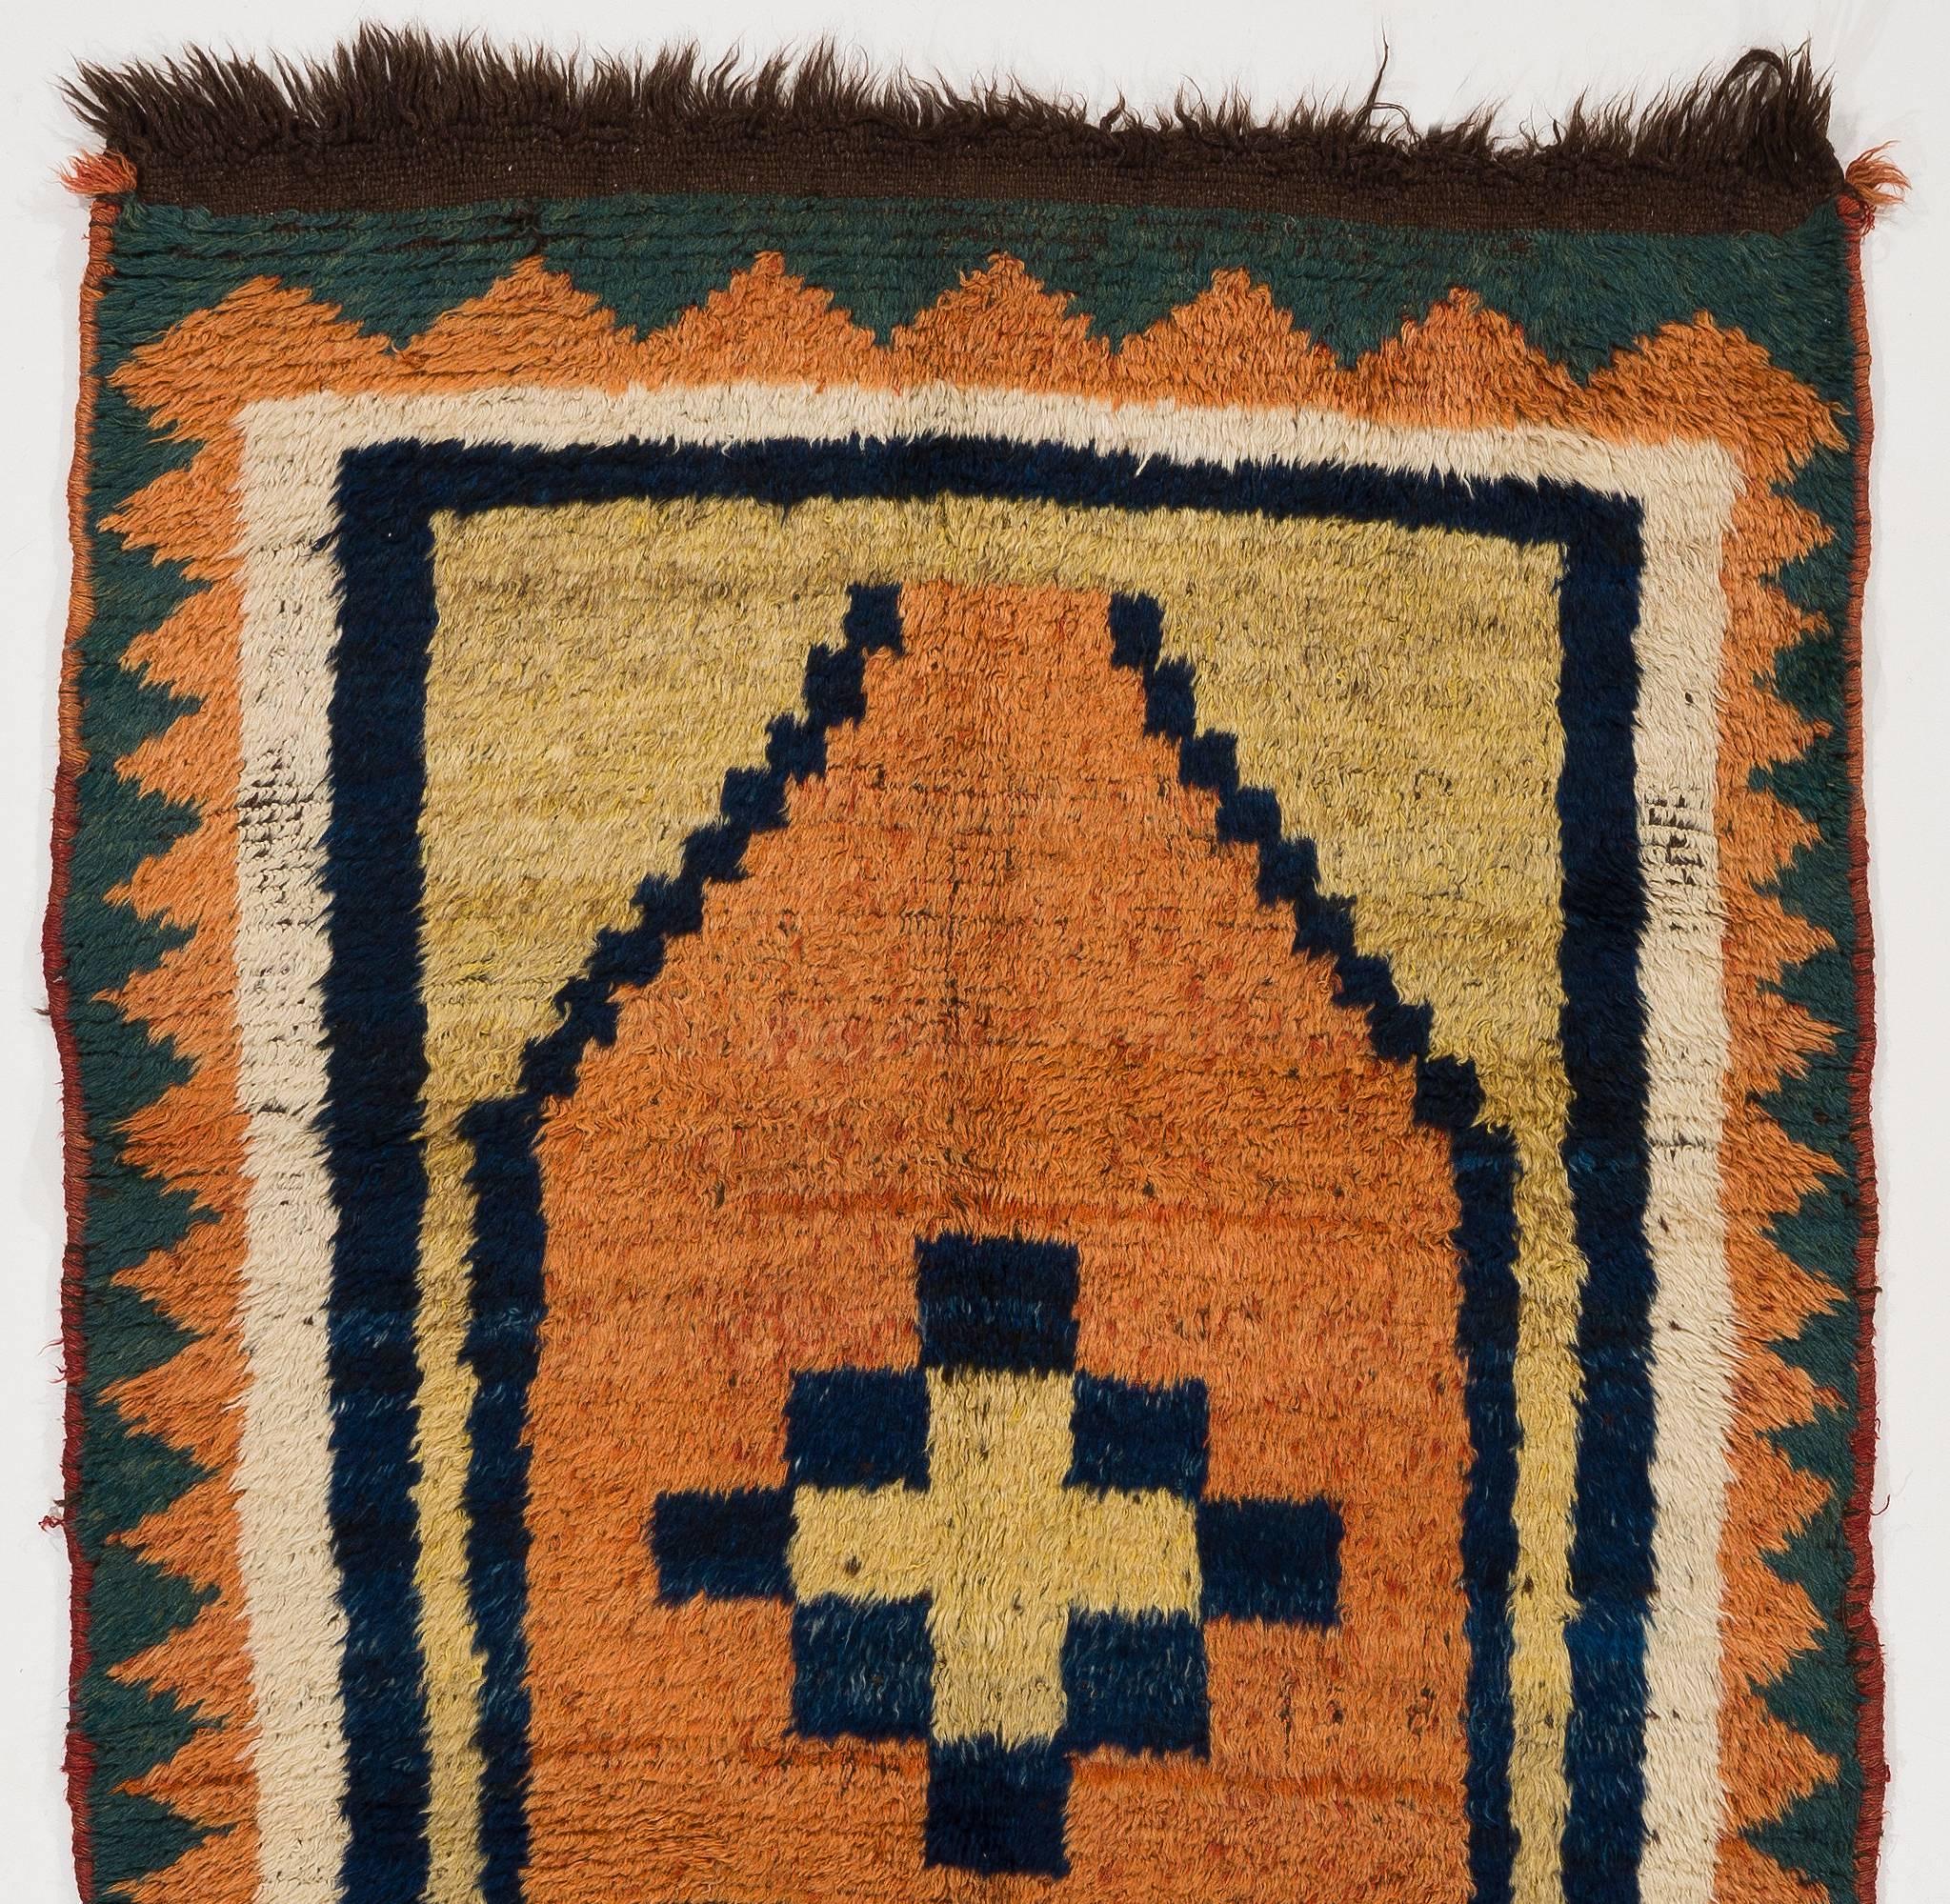 Antique Gabbeh rug with geometric medallion design. Finely hand-knotted with even medium wool pile on wool foundation. Very good condition. Sturdy and as clean as a brand new rug, washed professionally. Measures: 3.7 x 6.7 Ft.